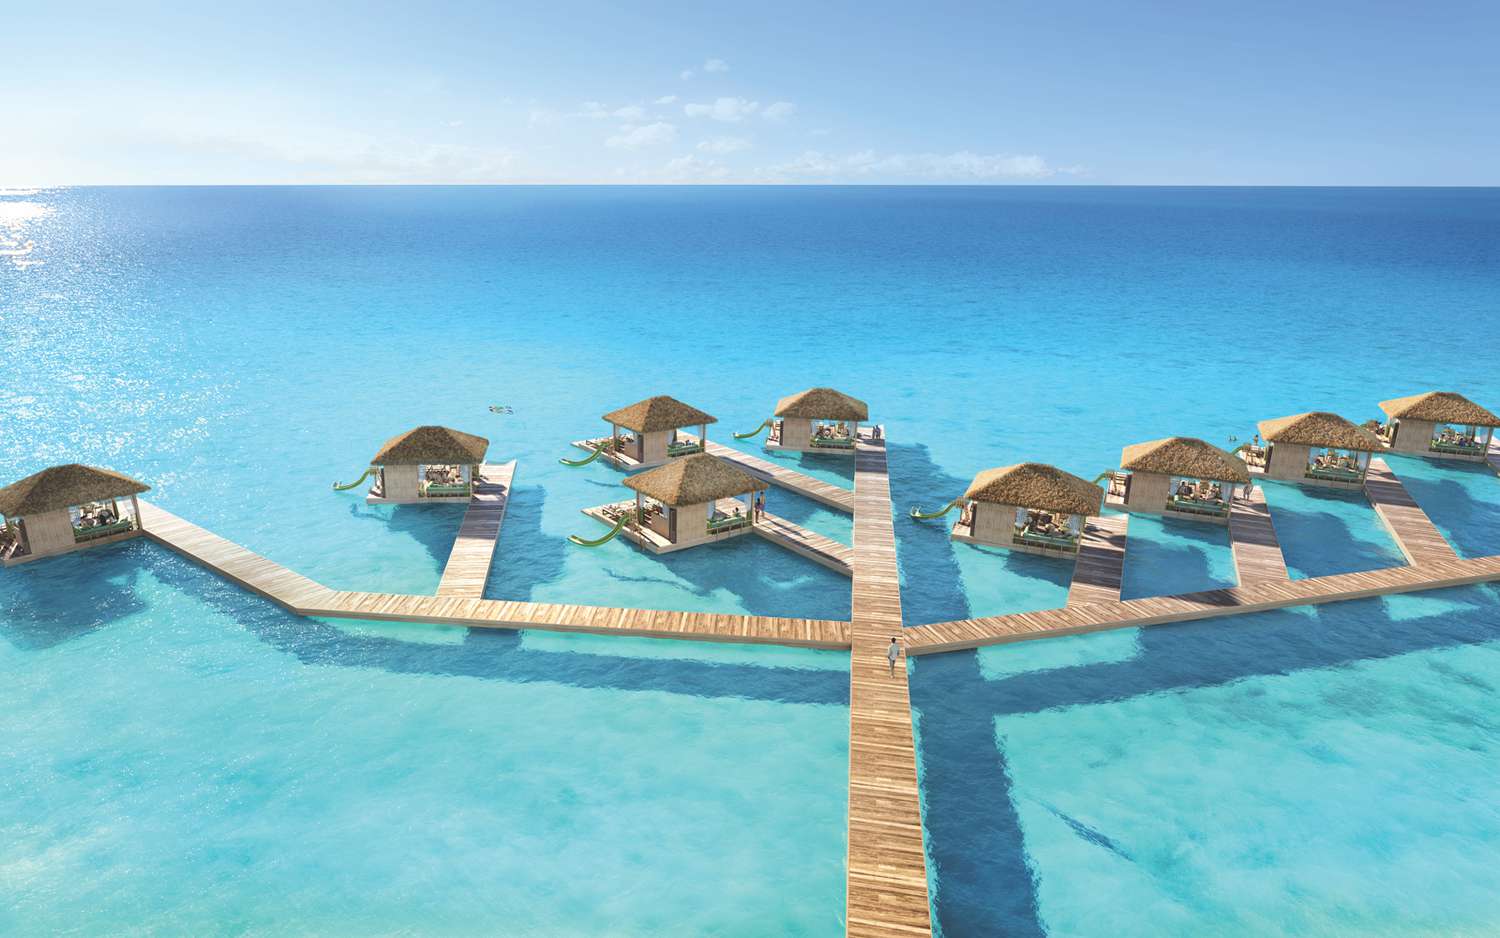 Royal Caribbean Offers the First Overwater Cabanas in the Bahamas